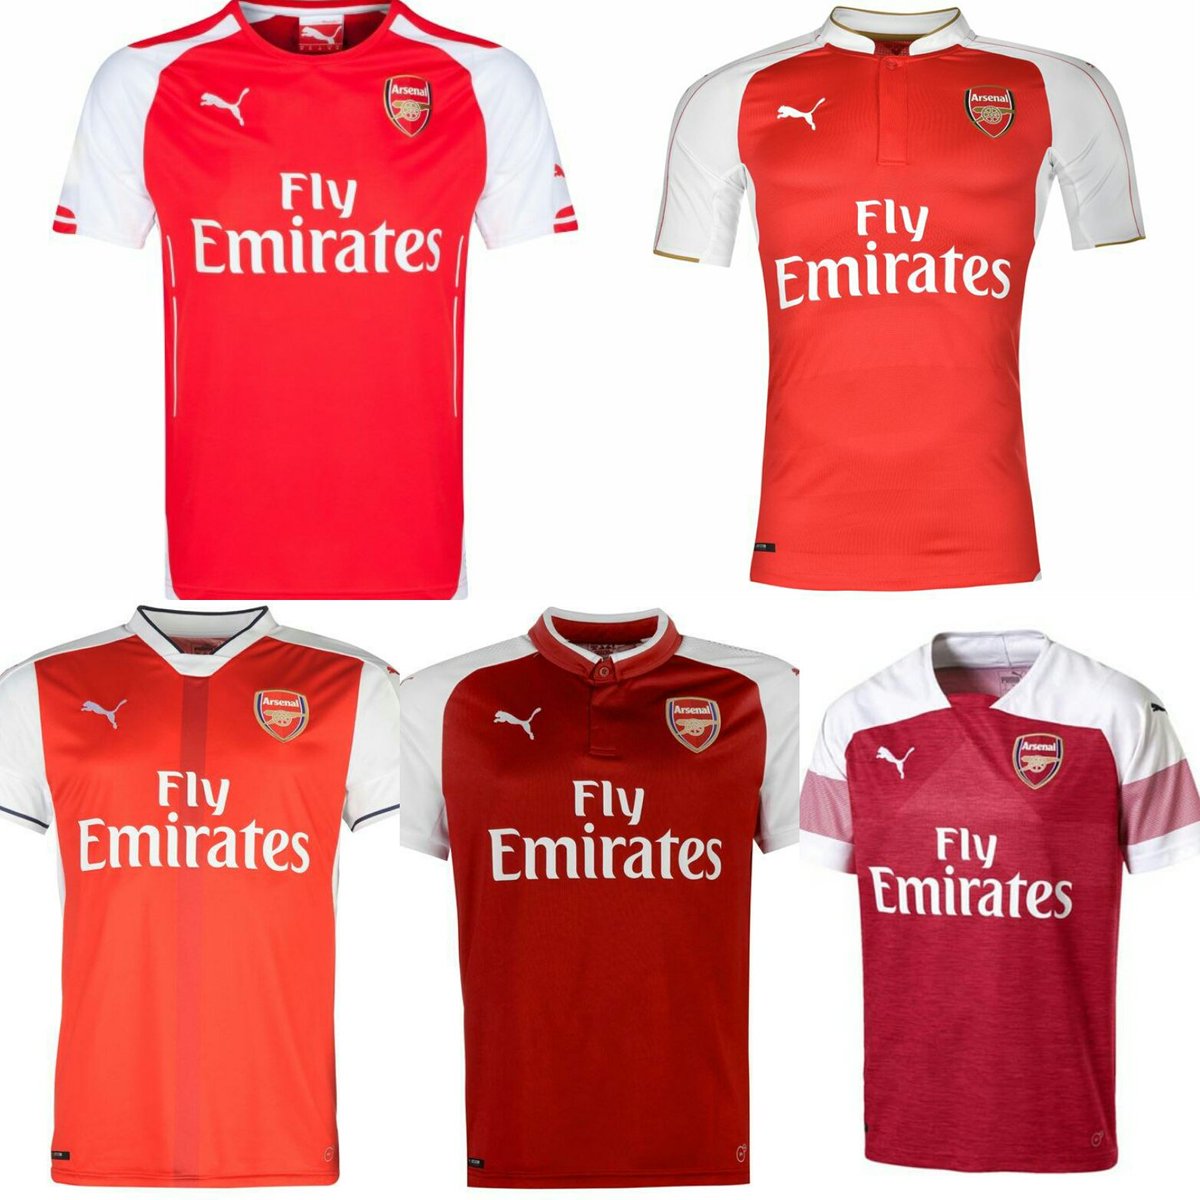 Will Adidas Make It Better? Here Are All 15 Puma Arsenal Kits in ...